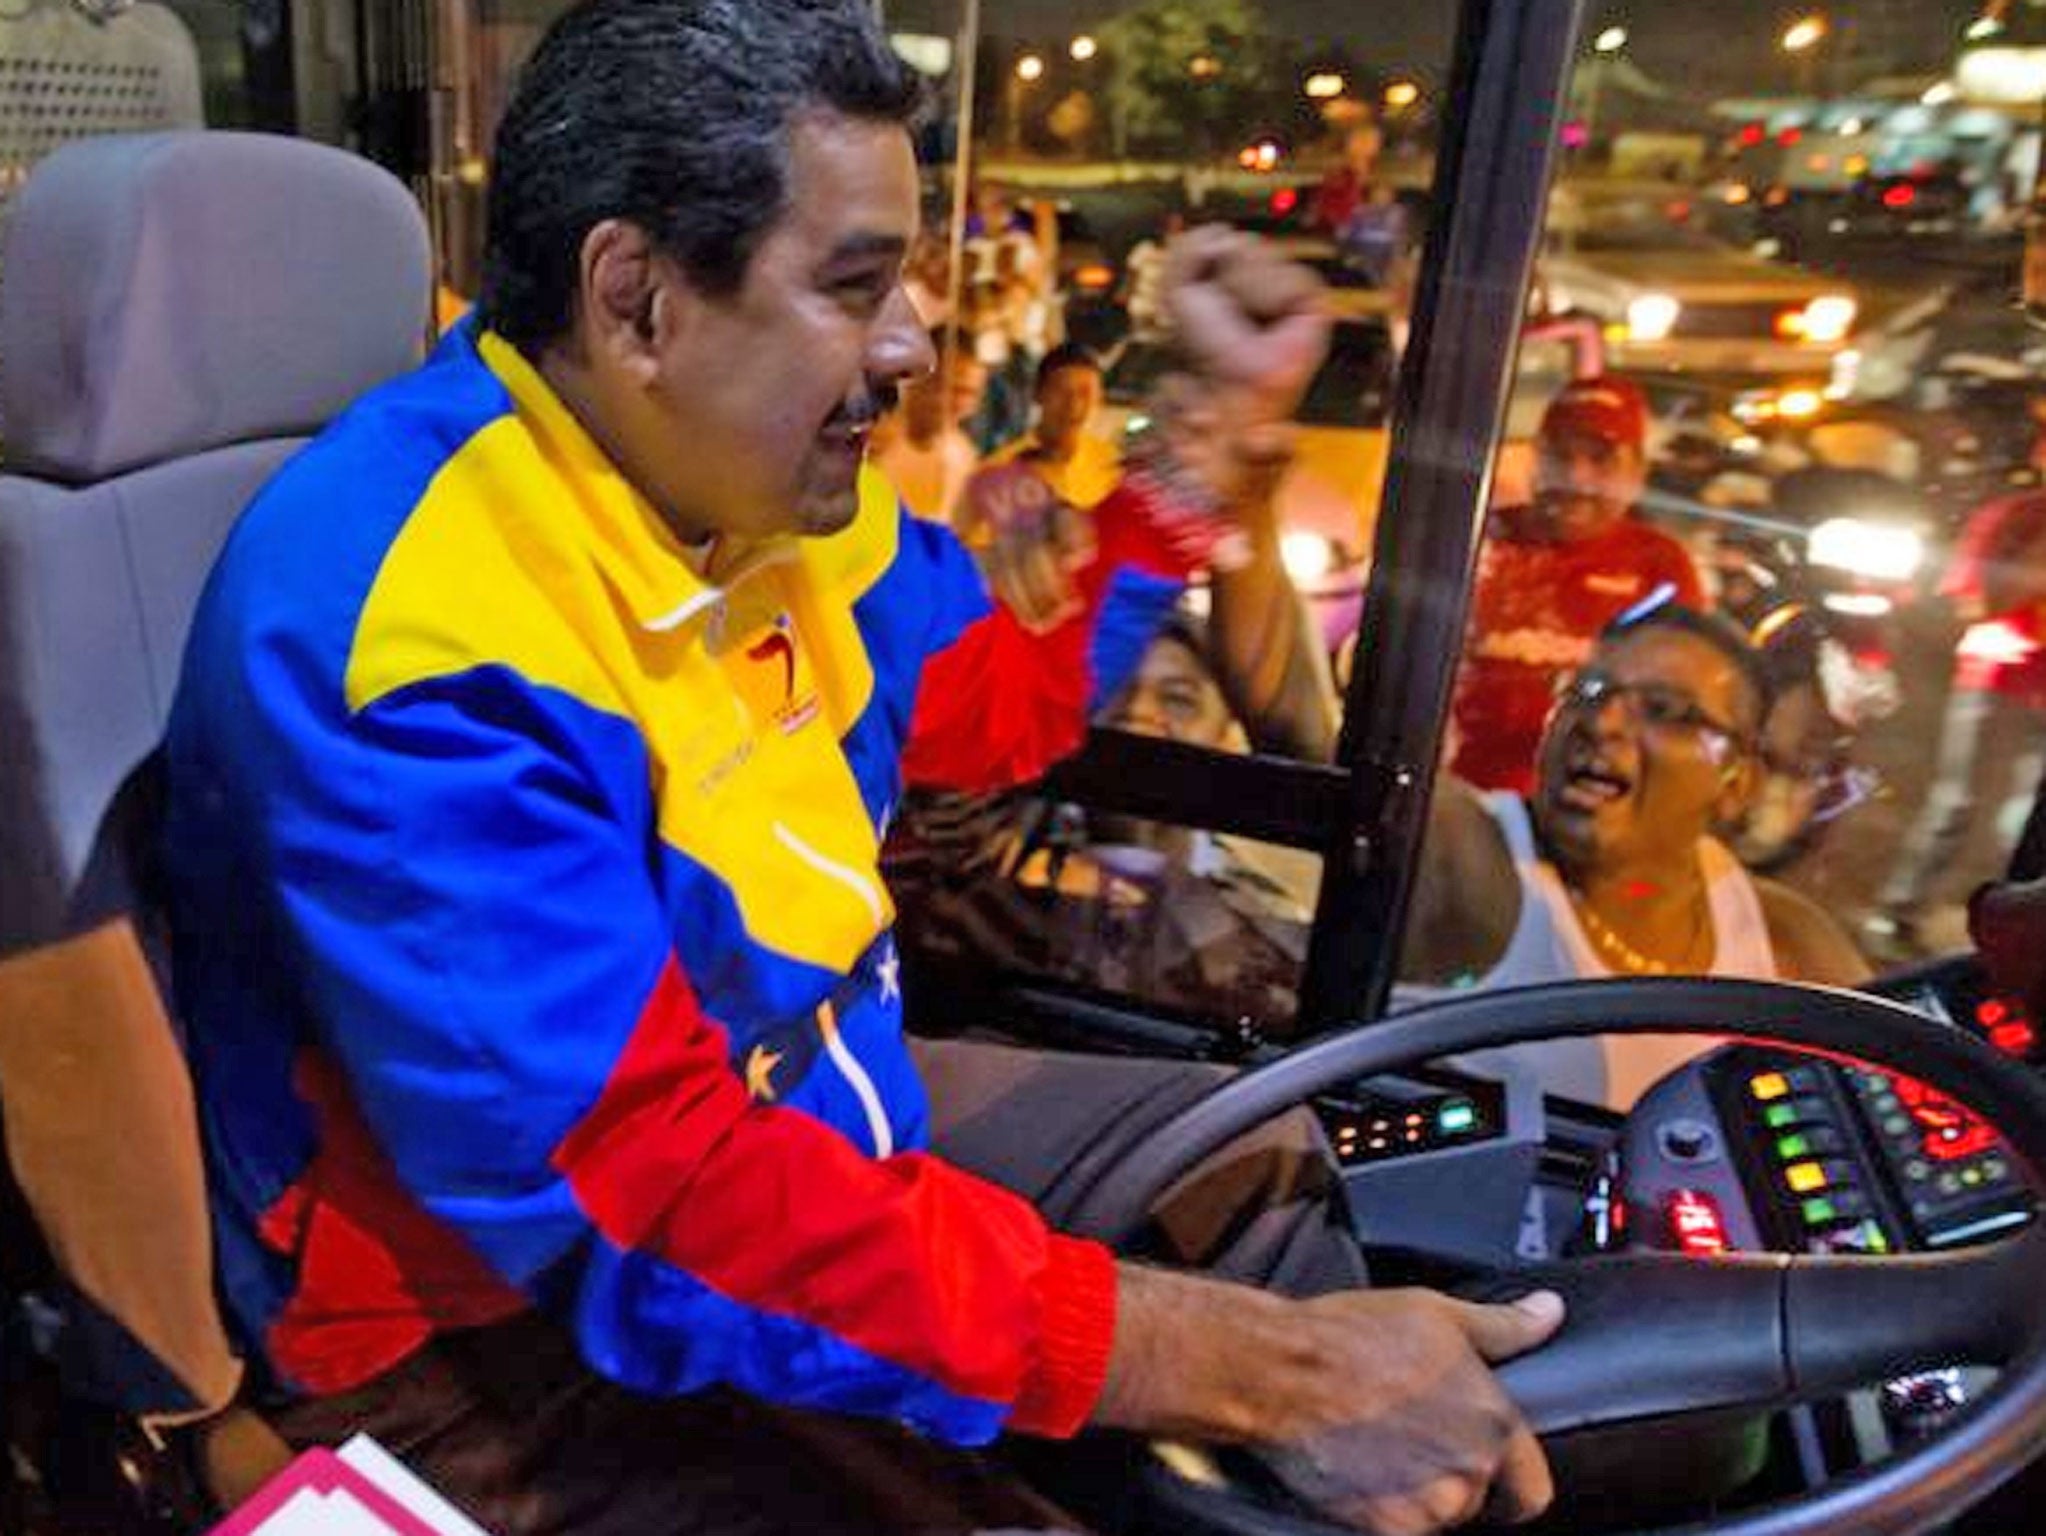 Venezuelan acting president and presidential candidate Nicolas Maduro drives a bus during an electoral campaign